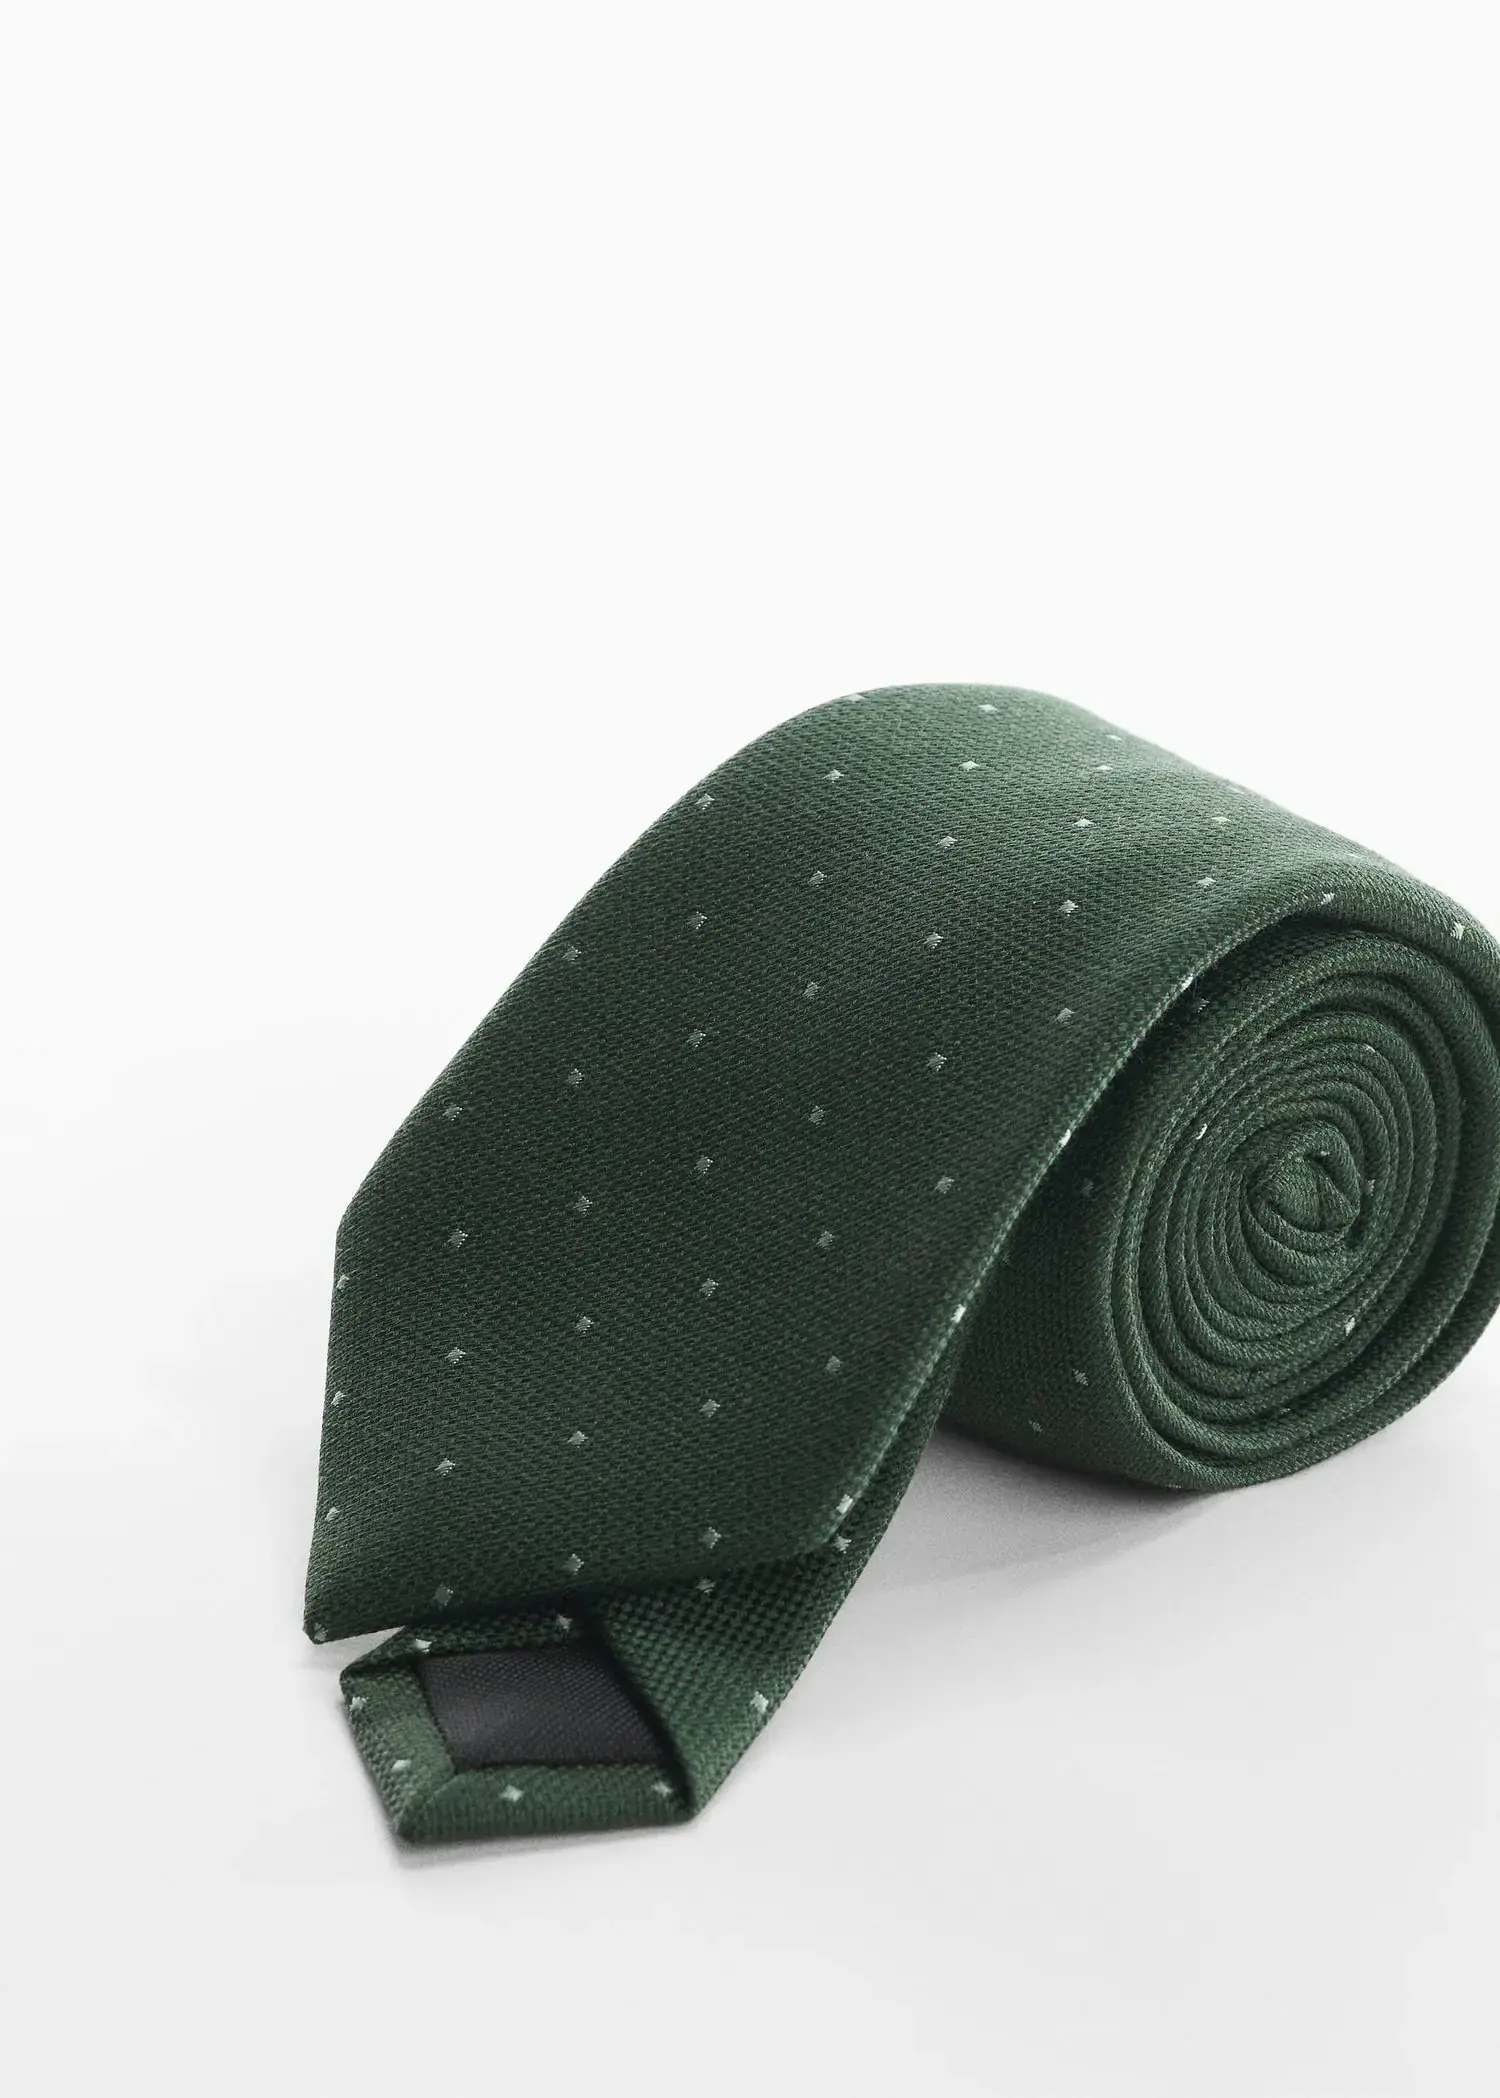 Mango Tie with micro polka-dot structure. a green neck tie on top of a table. 